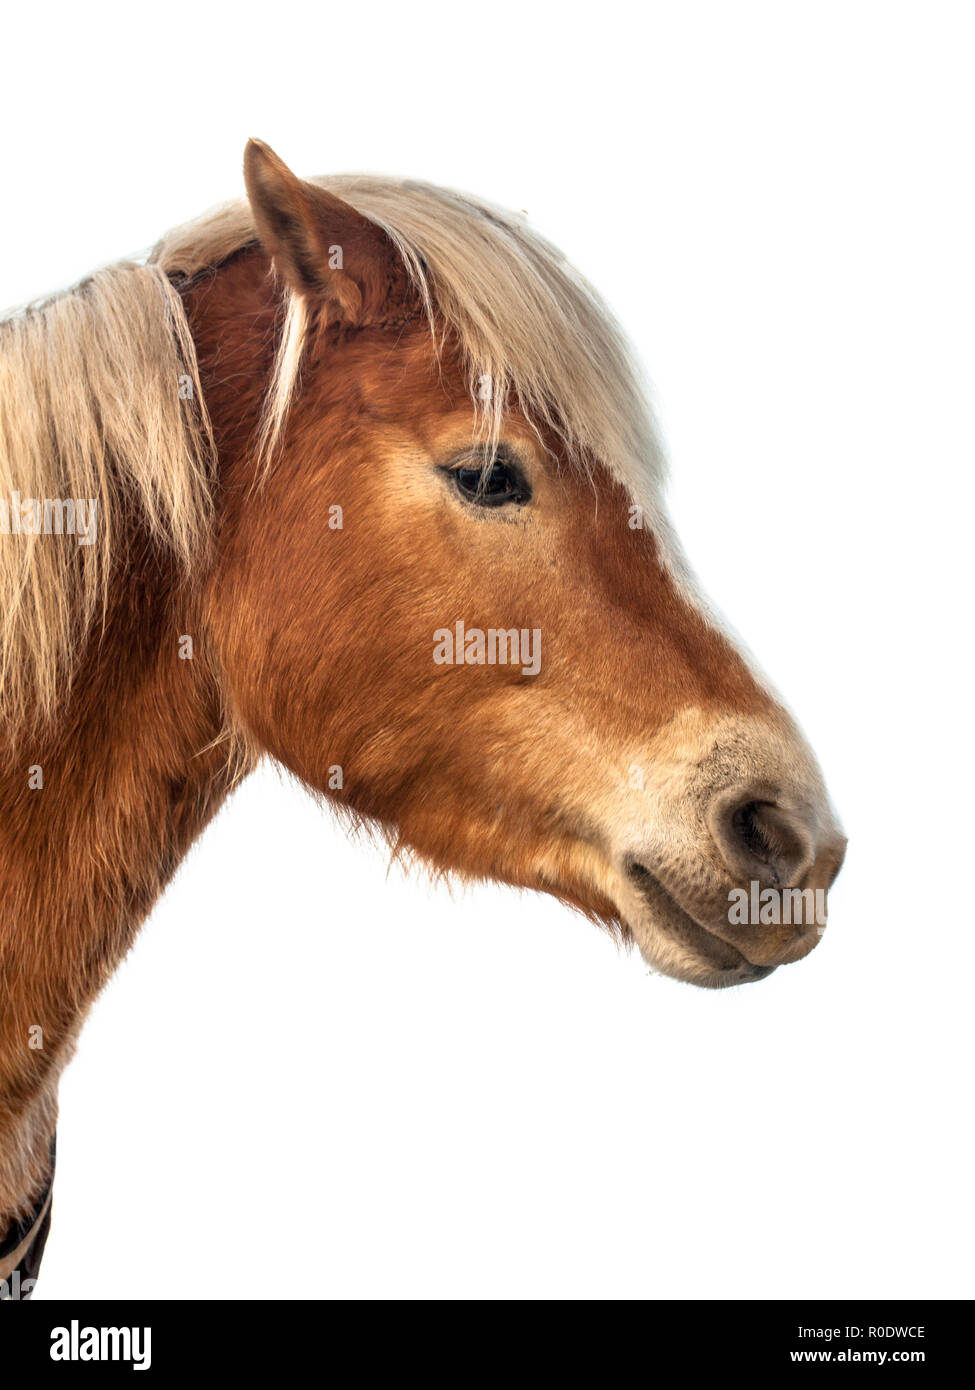 Head of a cute horse on white background. A proud animal with prominent colors and brown skin. Stock Photo